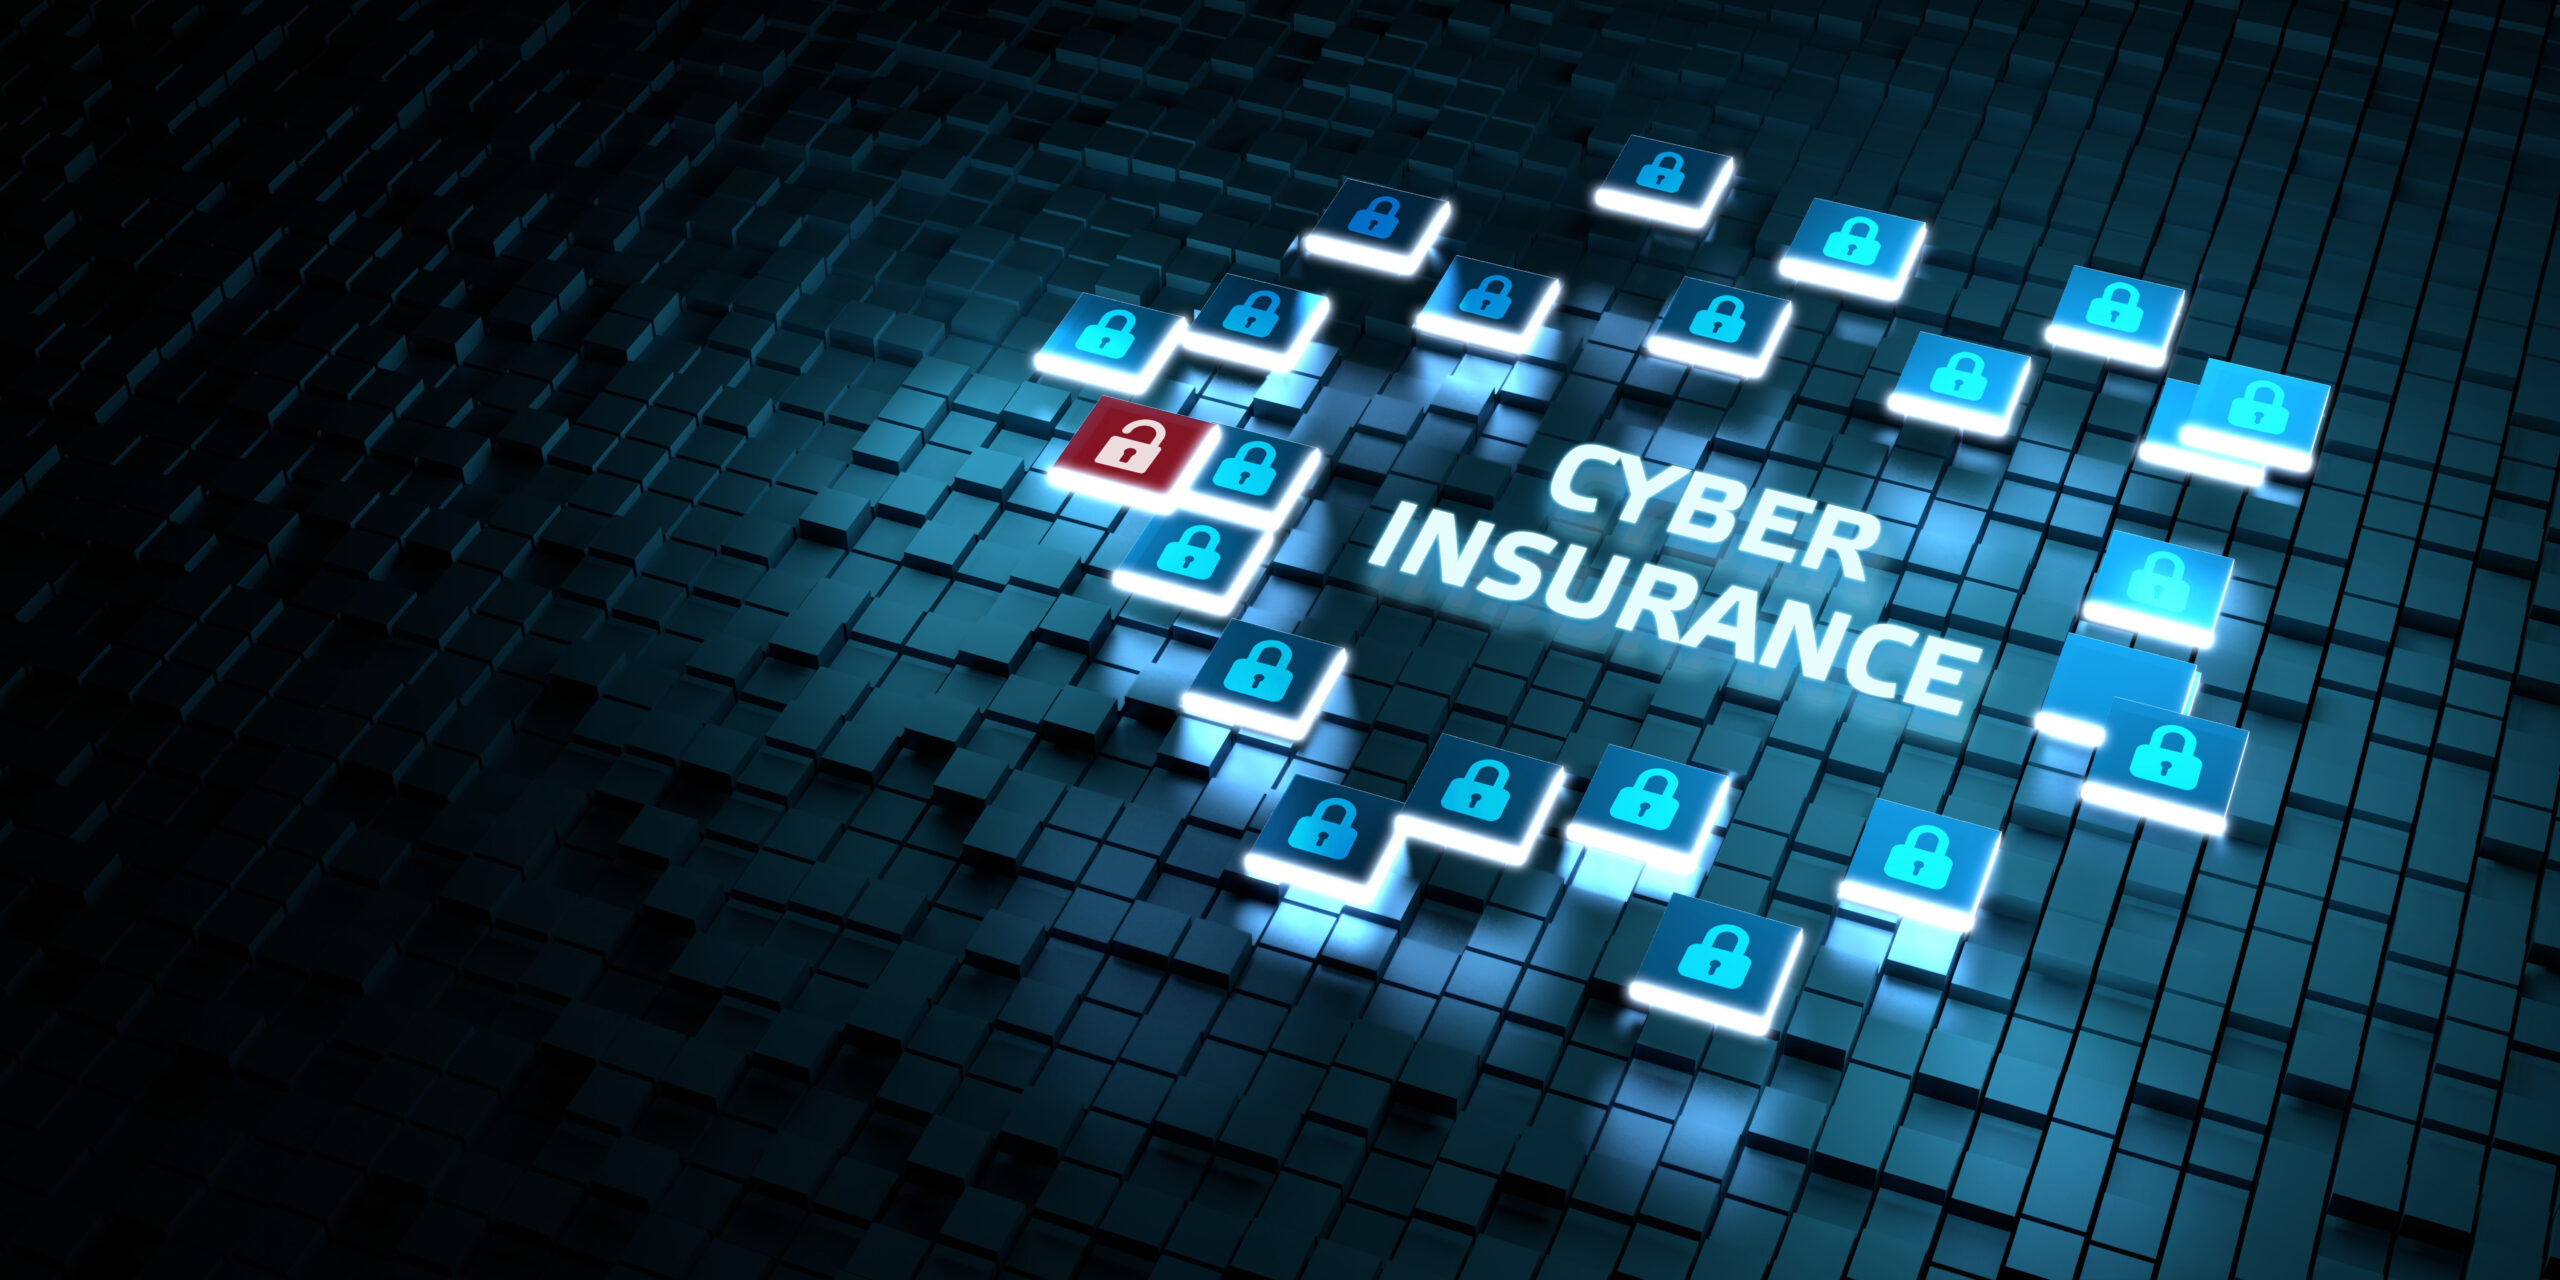 cyber insurance coverage silverfort